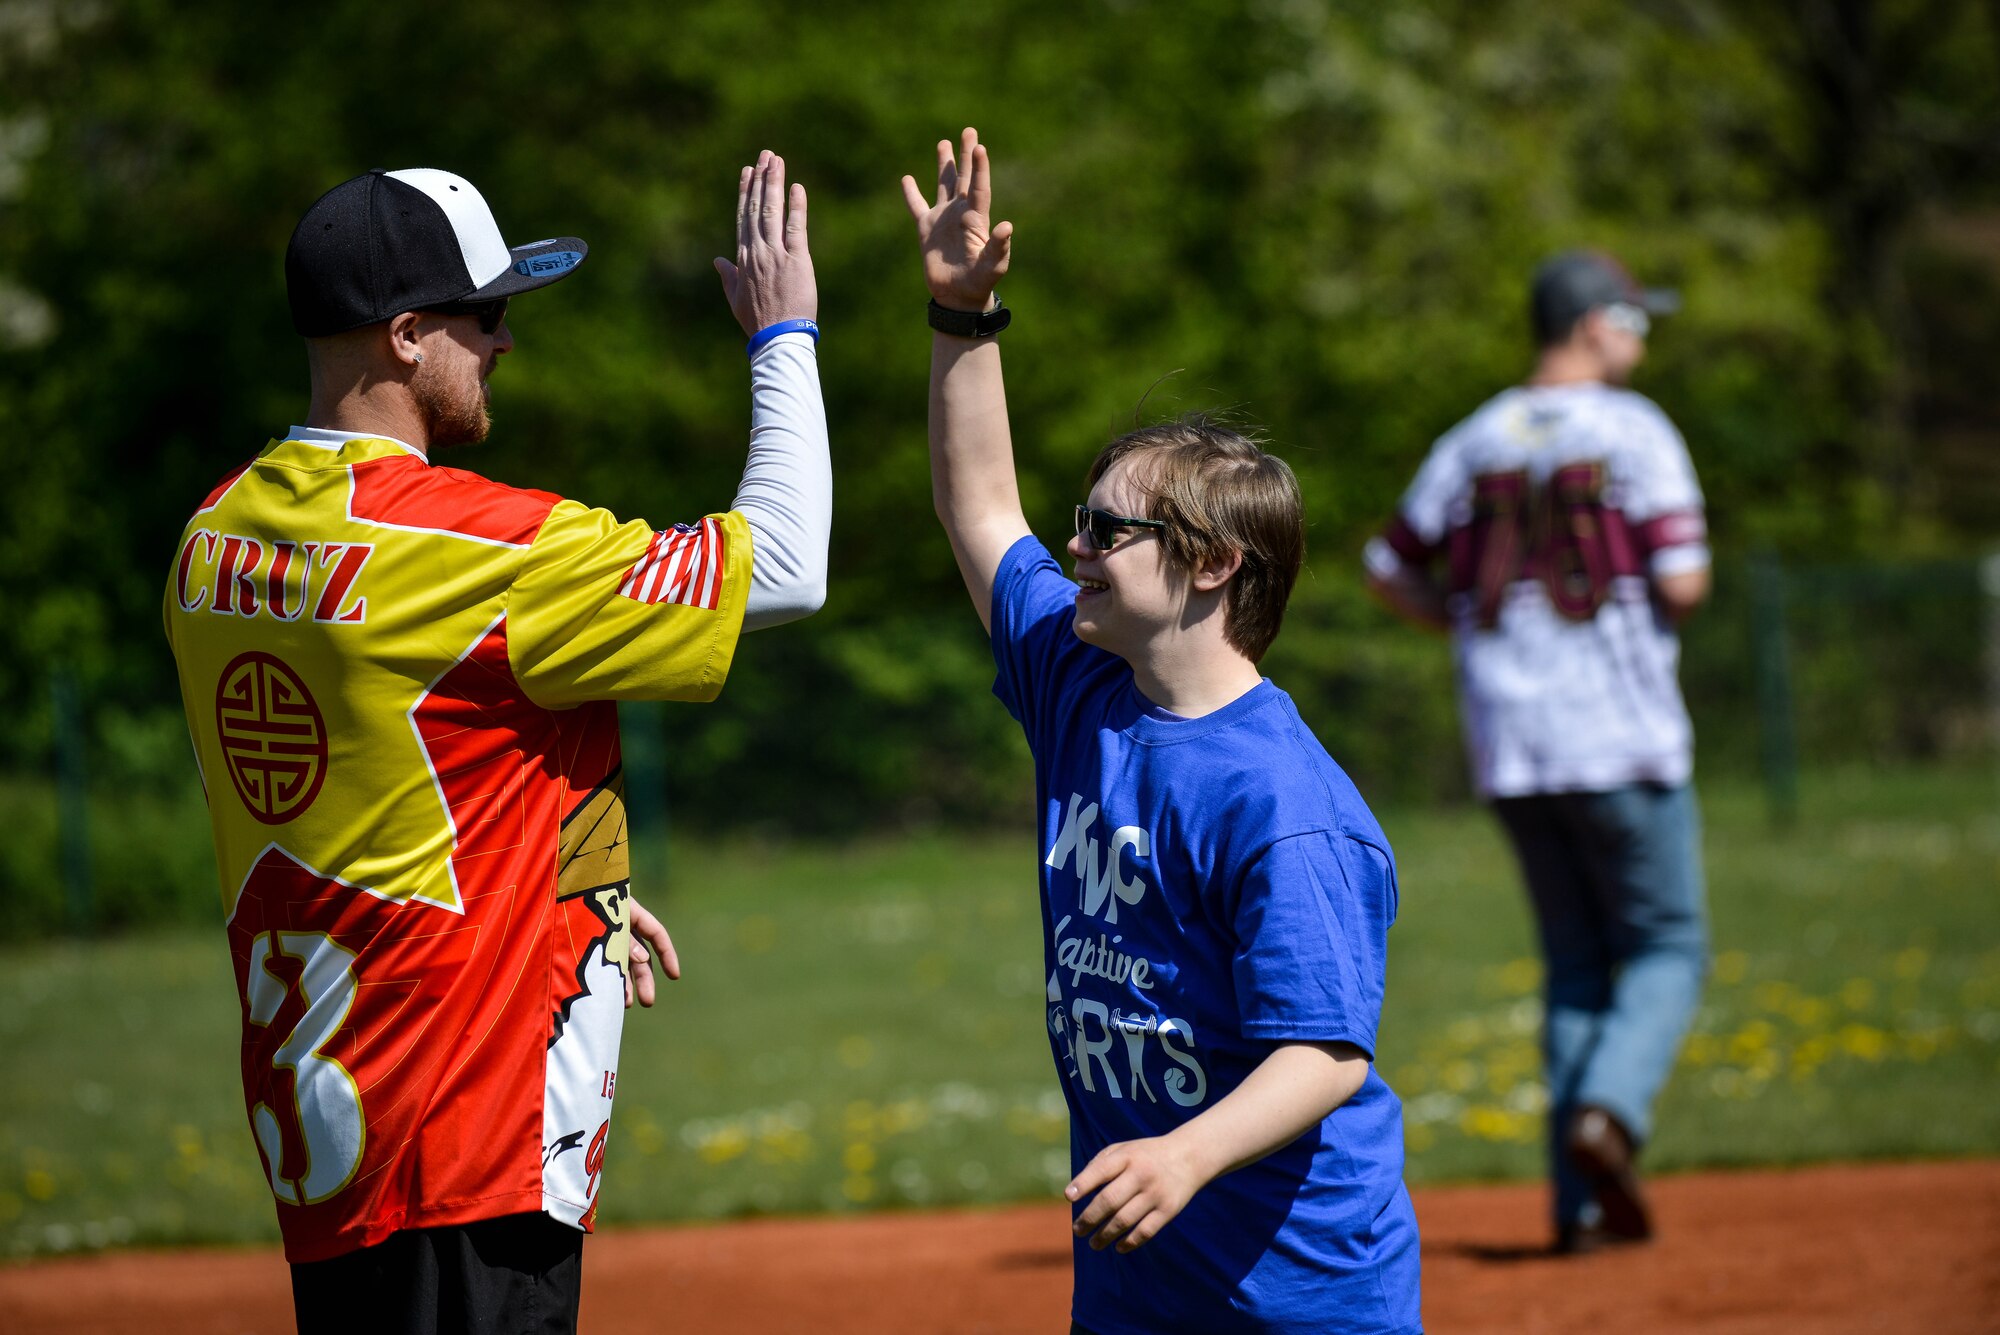 Nick Waller, Guzzler’s softball player and volunteer high-fives James Lucas, Ramstein Middle School student during an adaptive-sports softball game May 2, 2016, at Ramstein Air Base, Germany.  The adaptive-sports games held throughout the year give special-needs students a chance to come together to learn both social and physical skills. (U.S. Air Force photo/Senior Airman Nicole Keim)